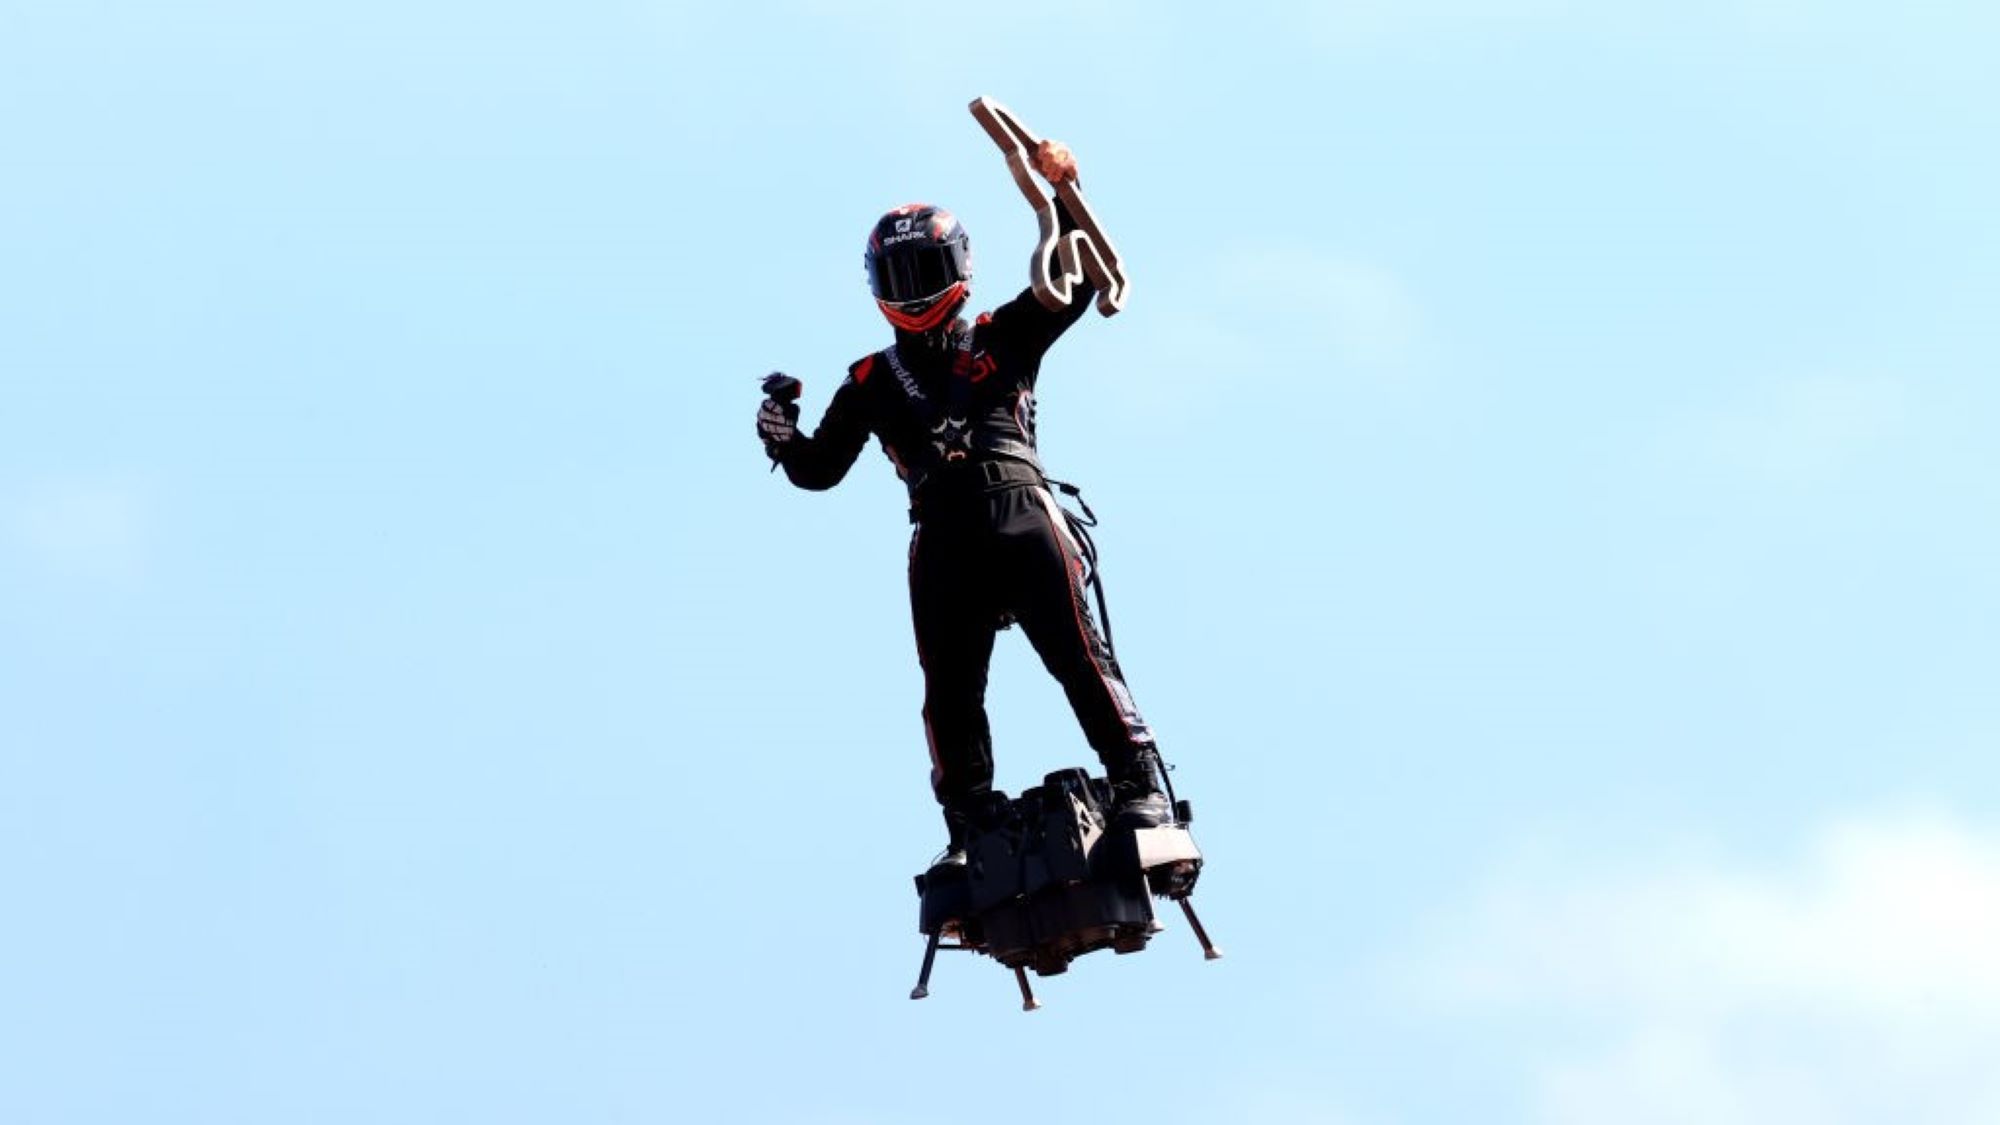 A performer on a hoverboard at the Formula !1 Belgian Grand Prix.